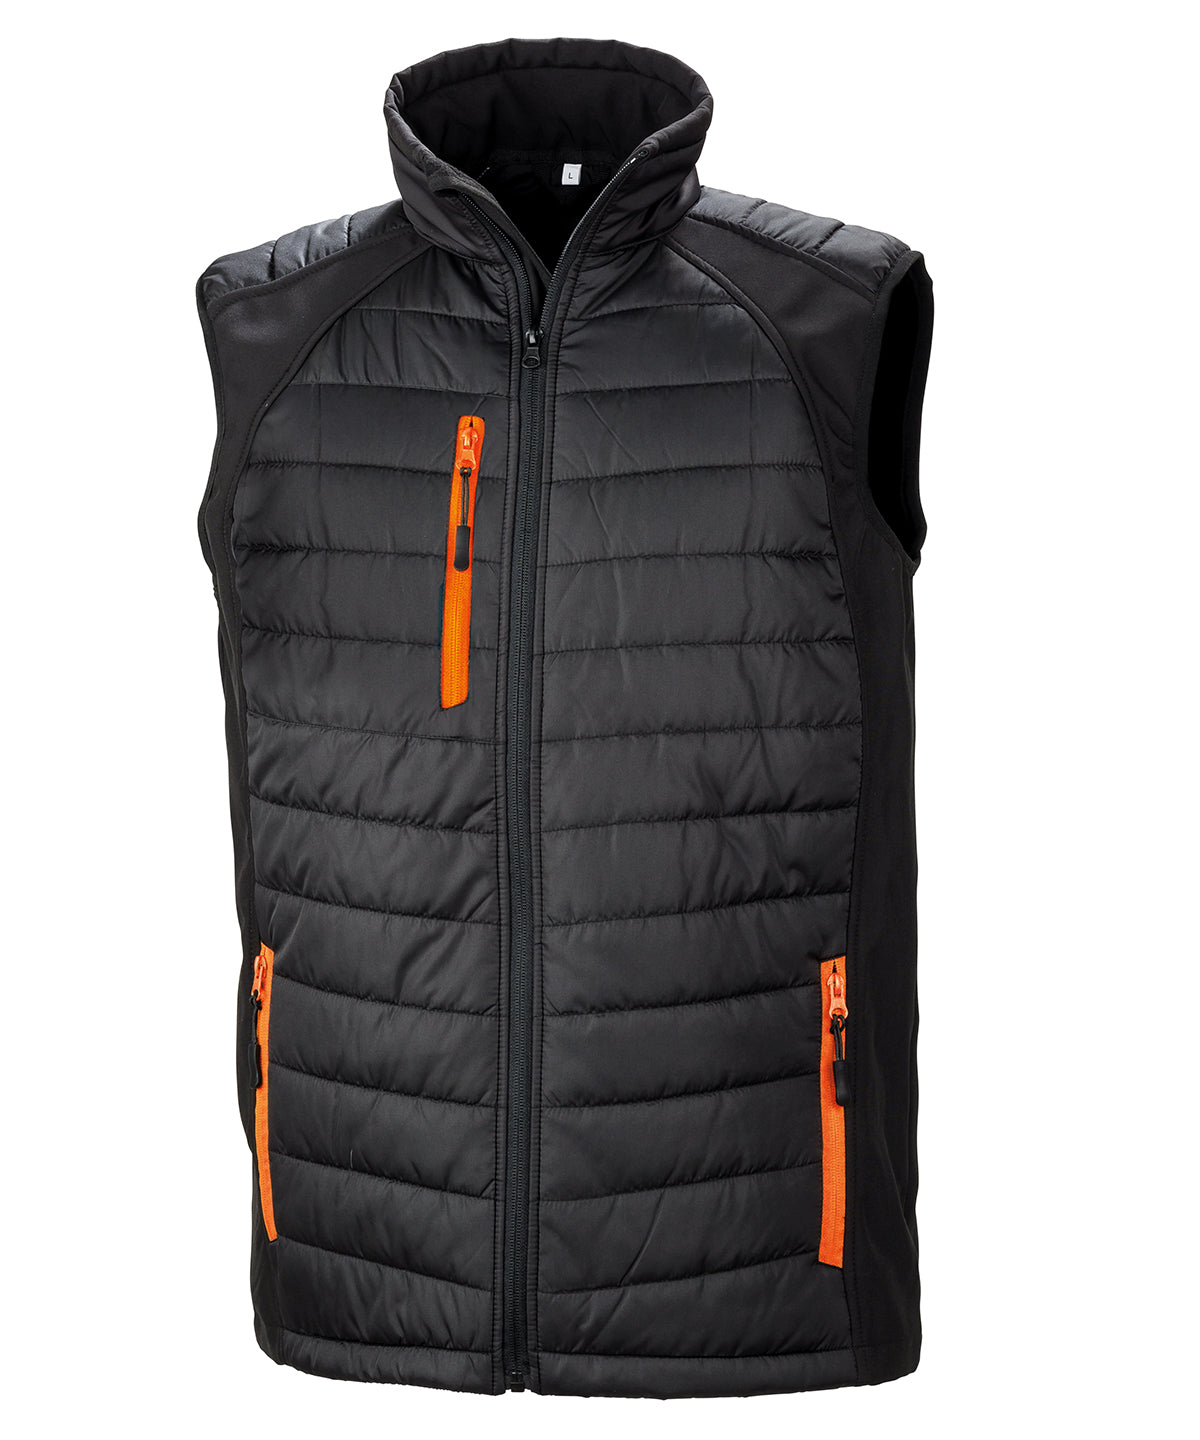 8x Embroidered Result Two-Tone Bodywarmer/Gilet with Company Logo